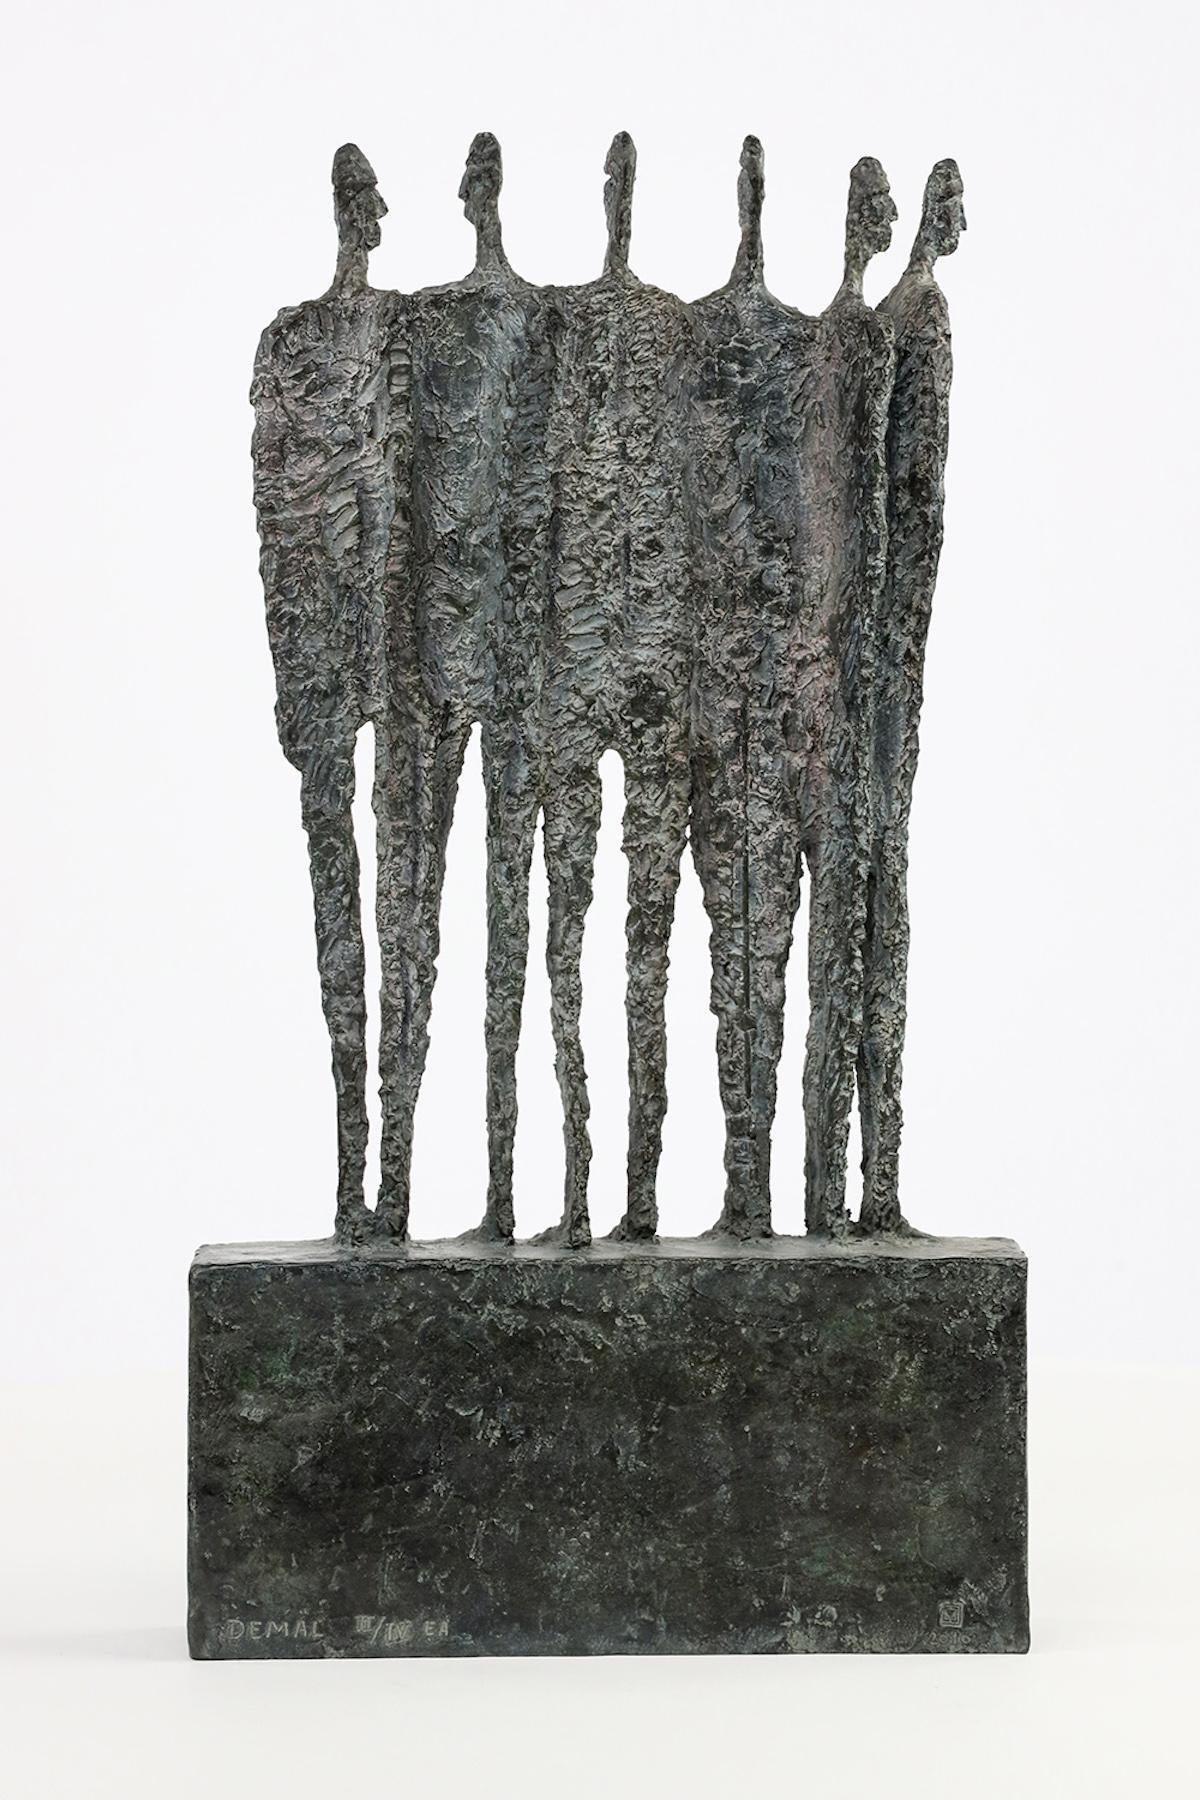 The Group by Martine Demal - bronze sculpture, group of human figures 2